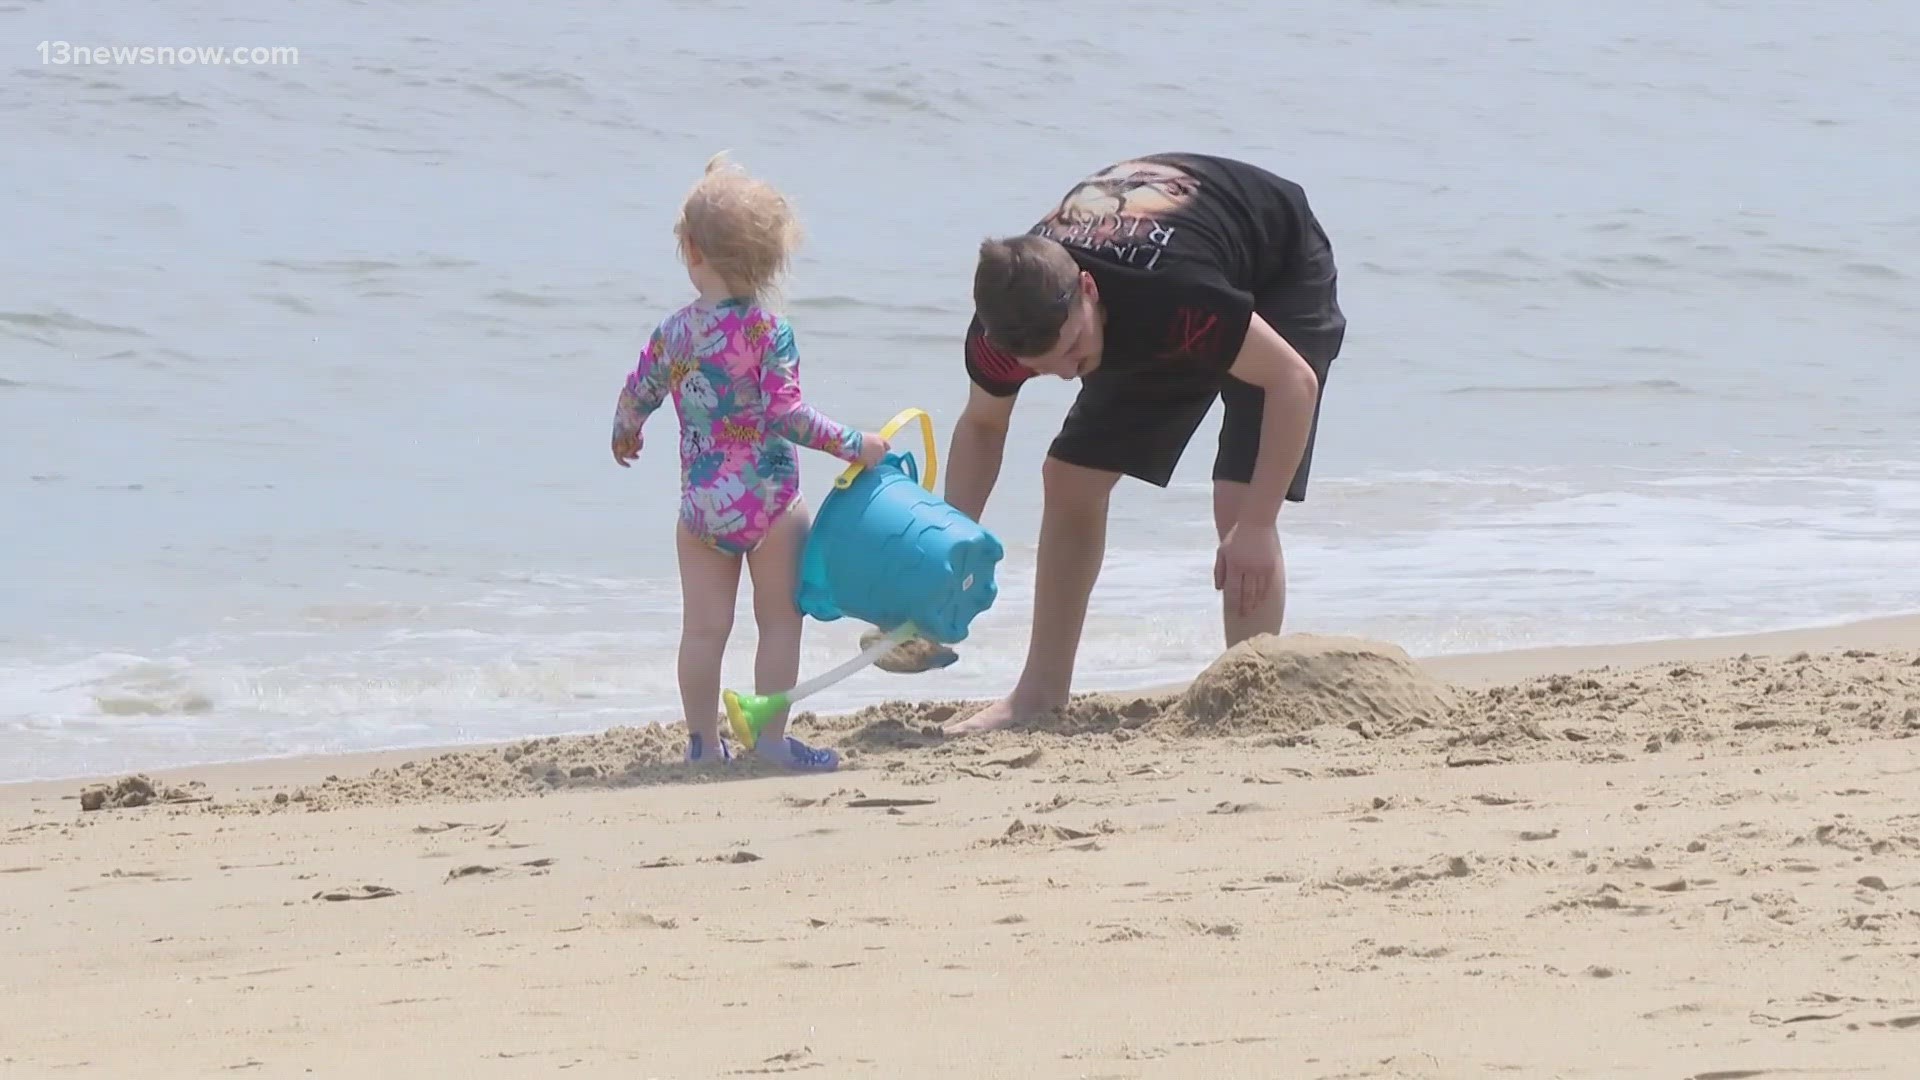 It’s something a lot of families like to do for fun – but officials say digging holes at the beach can be deadly and there are rules in place.